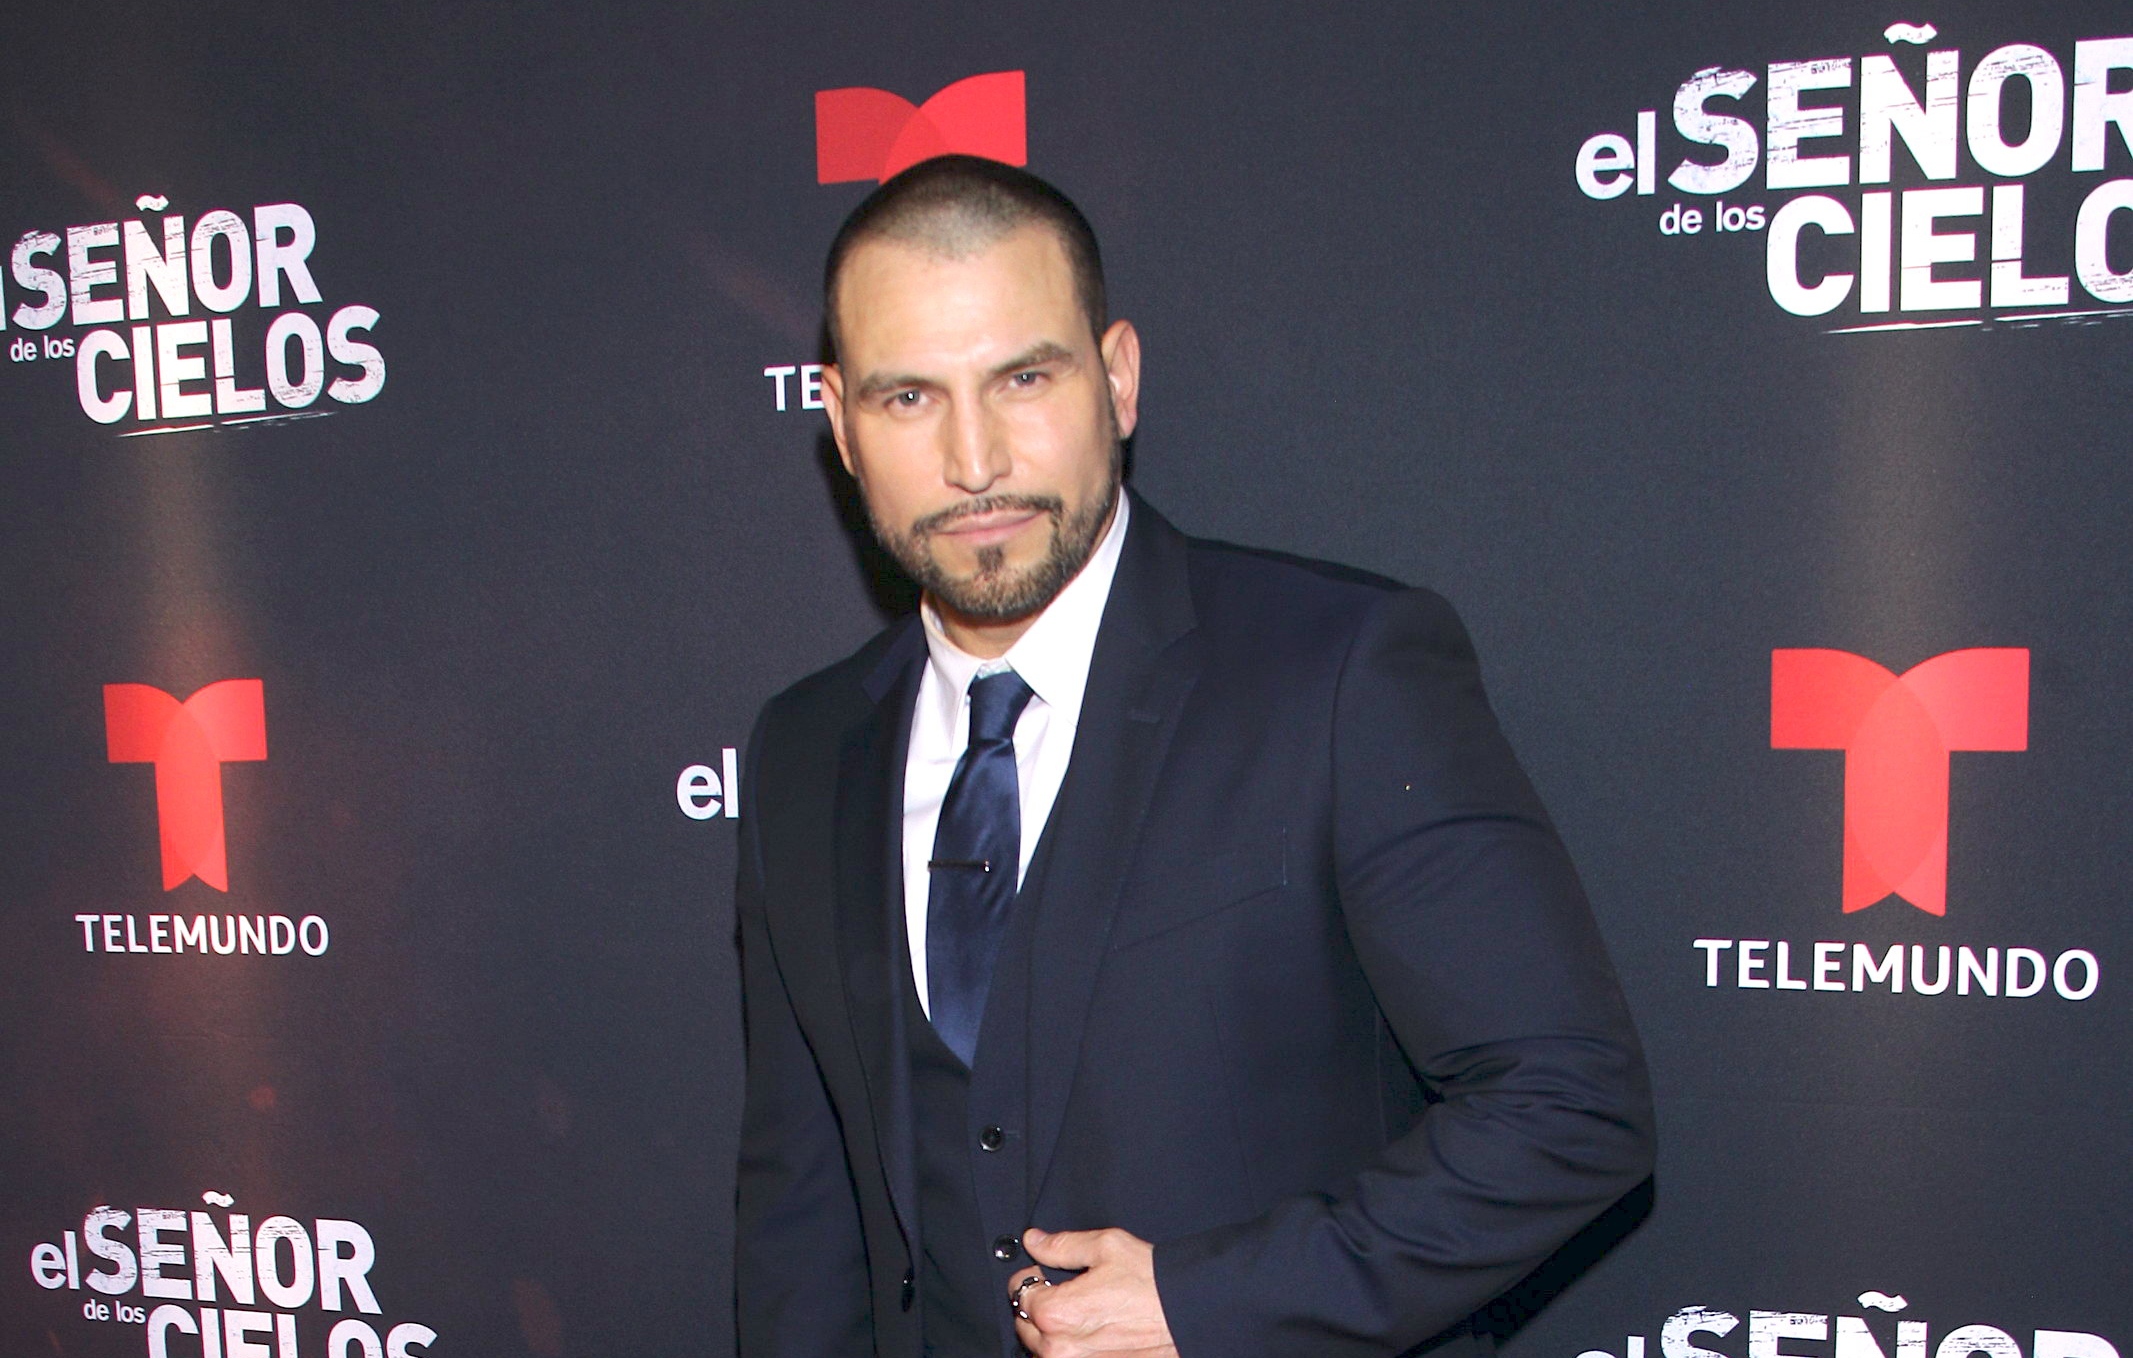 rafael-amaya-ends-his-contract-with-telemundo:-the-network-confirms-the-news-and-wishes-him-the-best